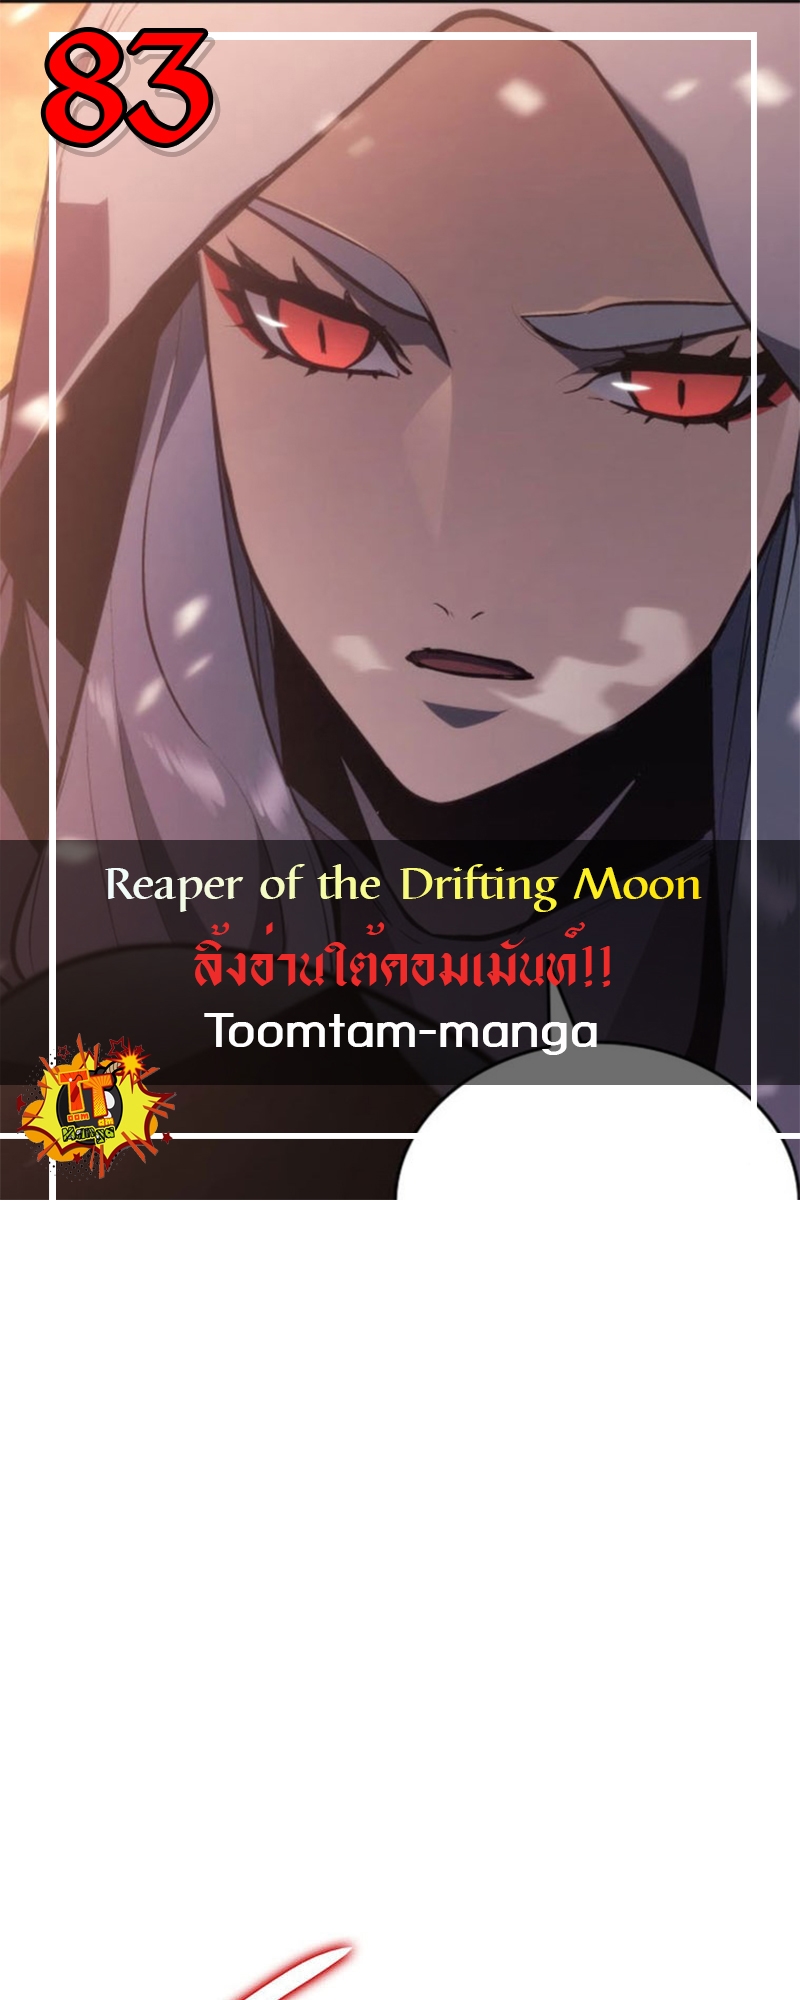 Reaper of the Drifting Moon 83 11 04 25670001